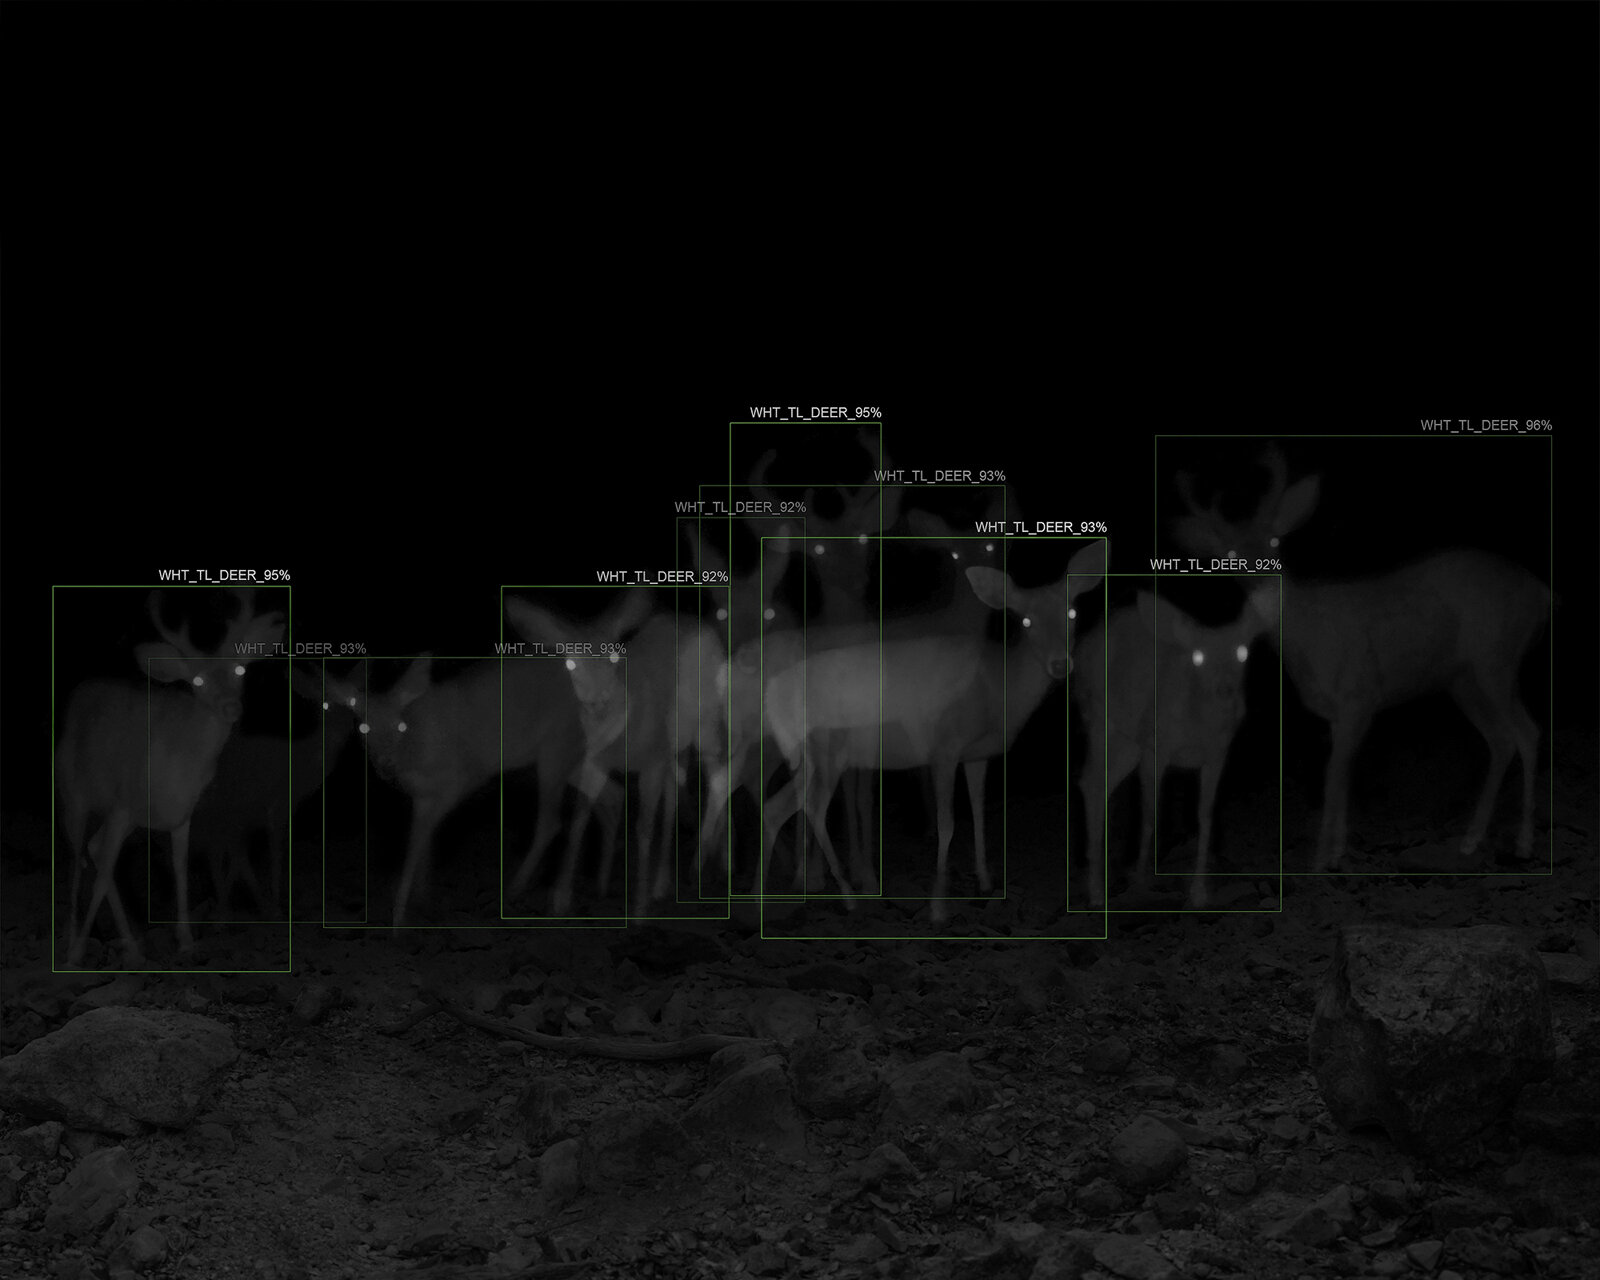   10 Captures of White-Tailed Deer with A.I. Recognition, 1-Week Interval, Patagonia Mountains, AZ,  2019 